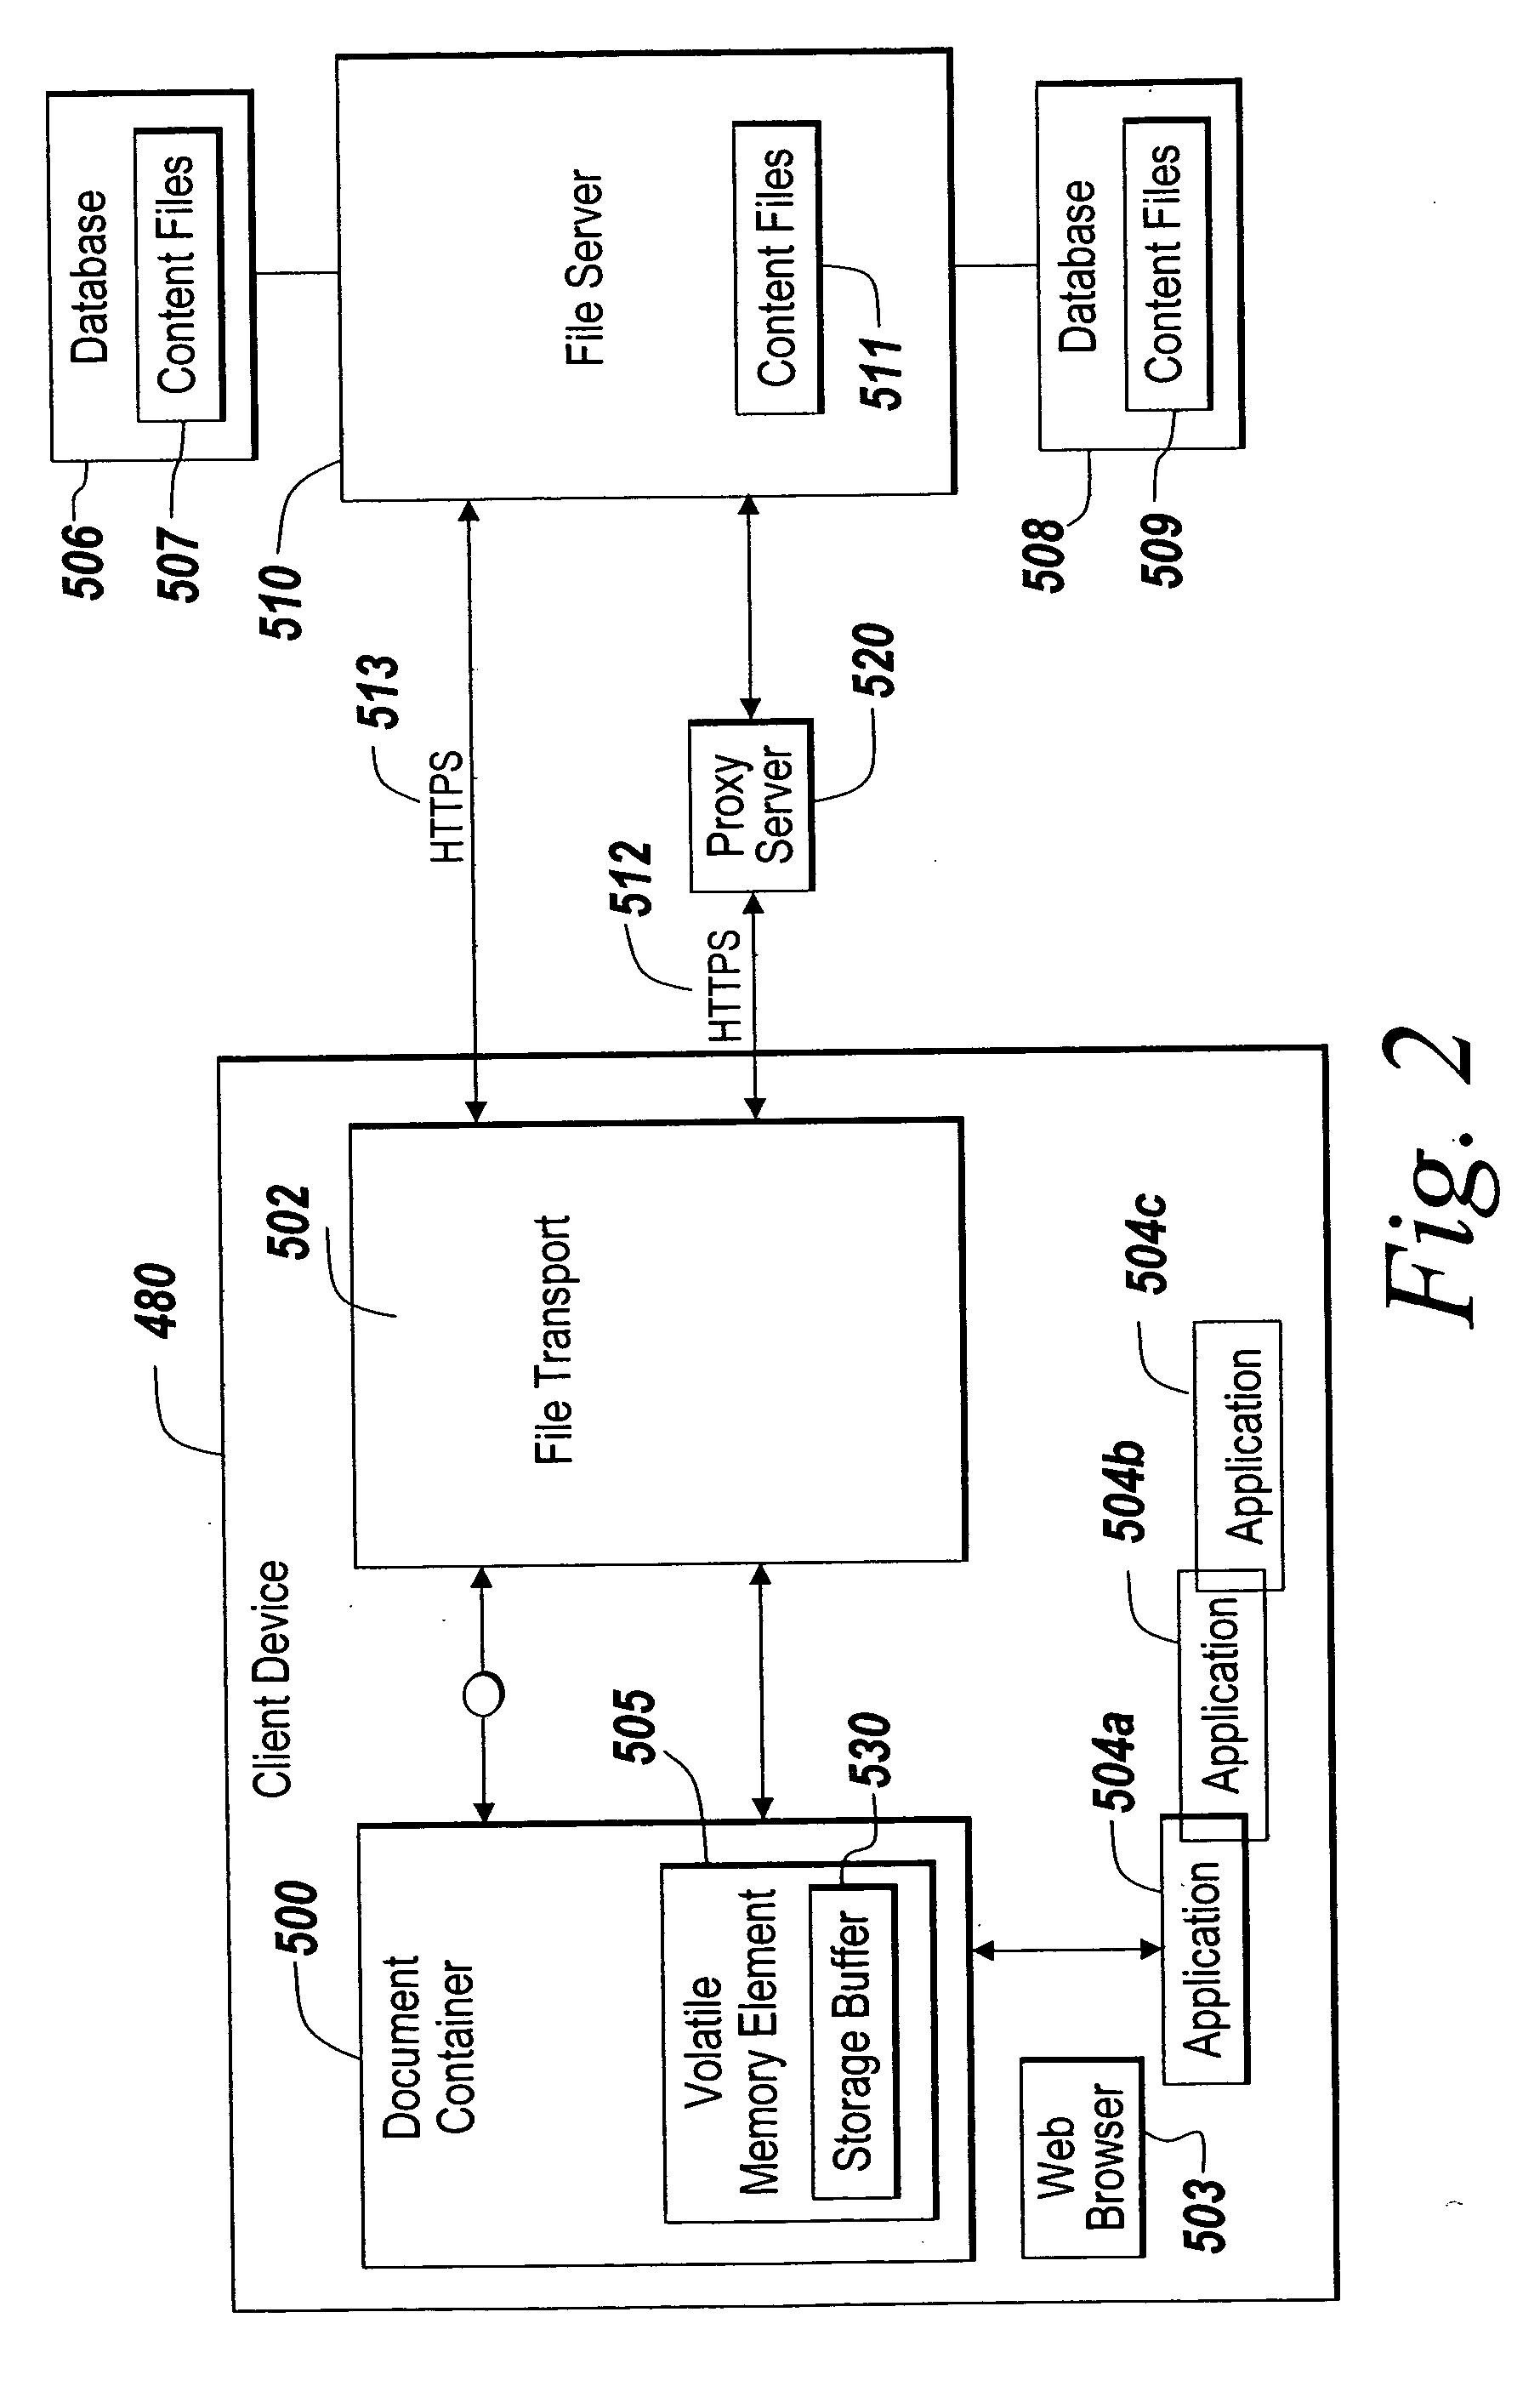 Methods and apparatus for secure online access on a client device